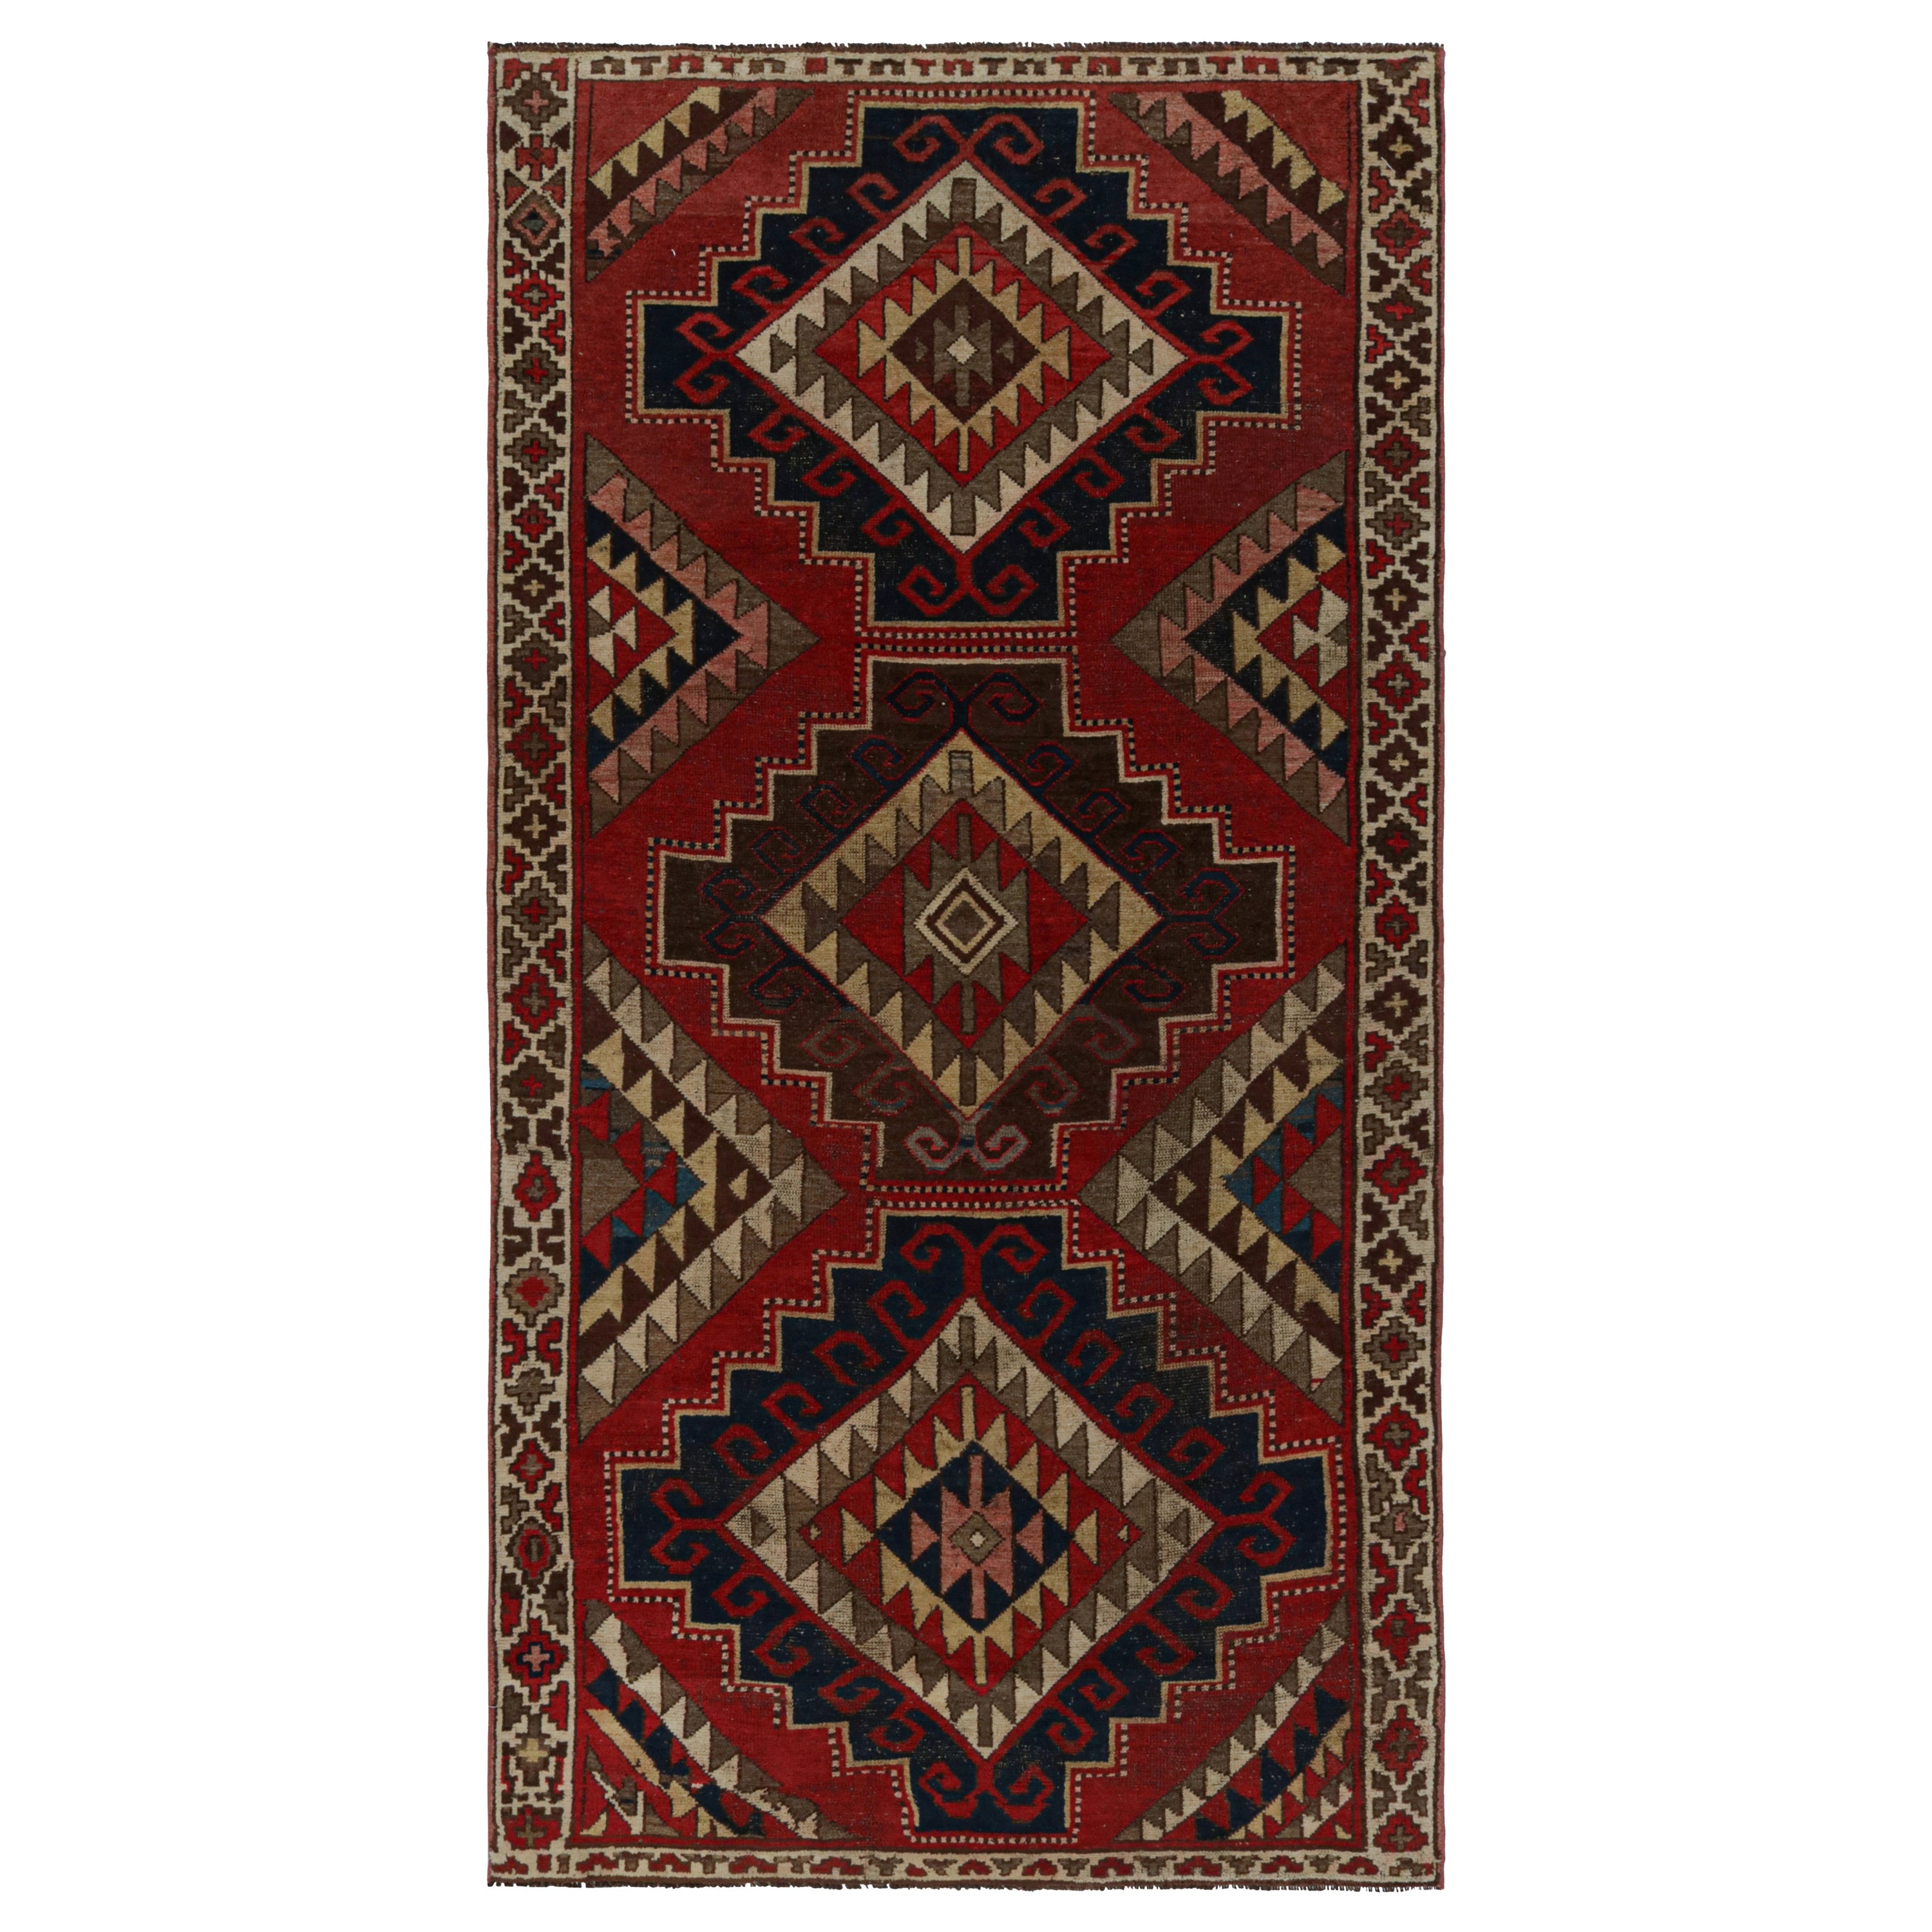 Vintage Turkish Rug, with All-Over Geometric Patterns, from Rug & Kilim For Sale